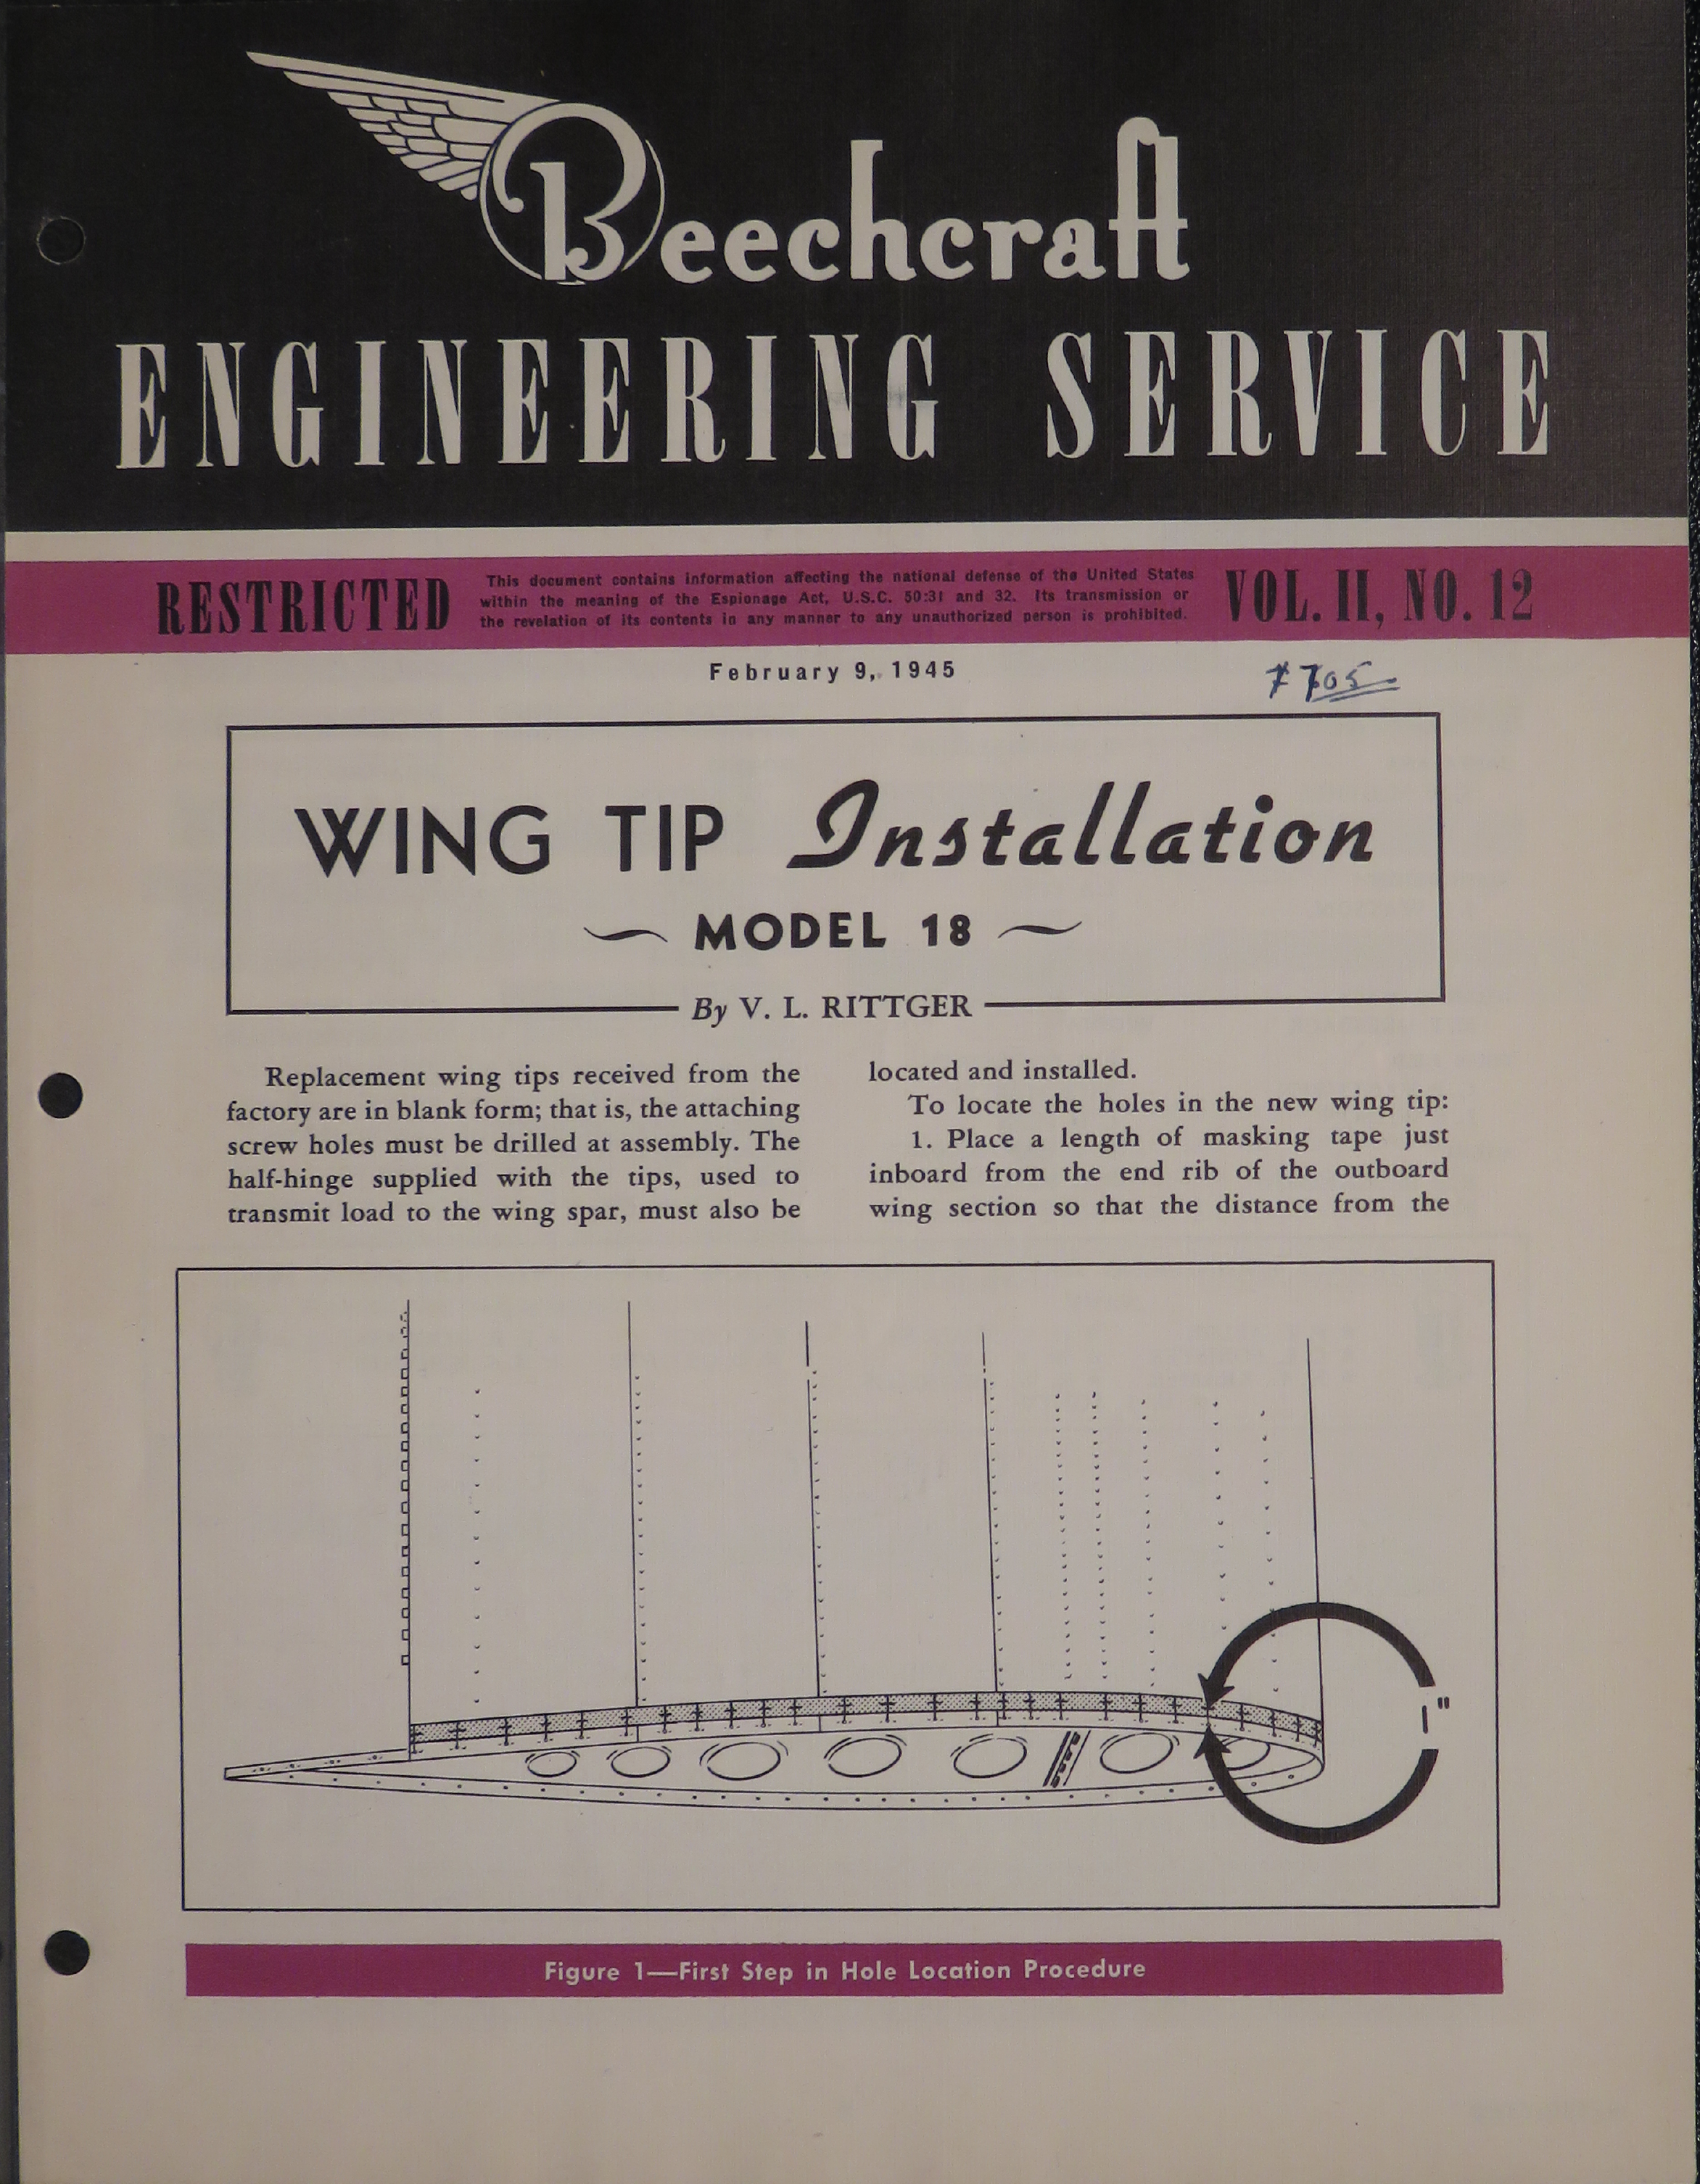 Sample page 1 from AirCorps Library document: Vol. II, No. 12 - Beechcraft Engineering Service